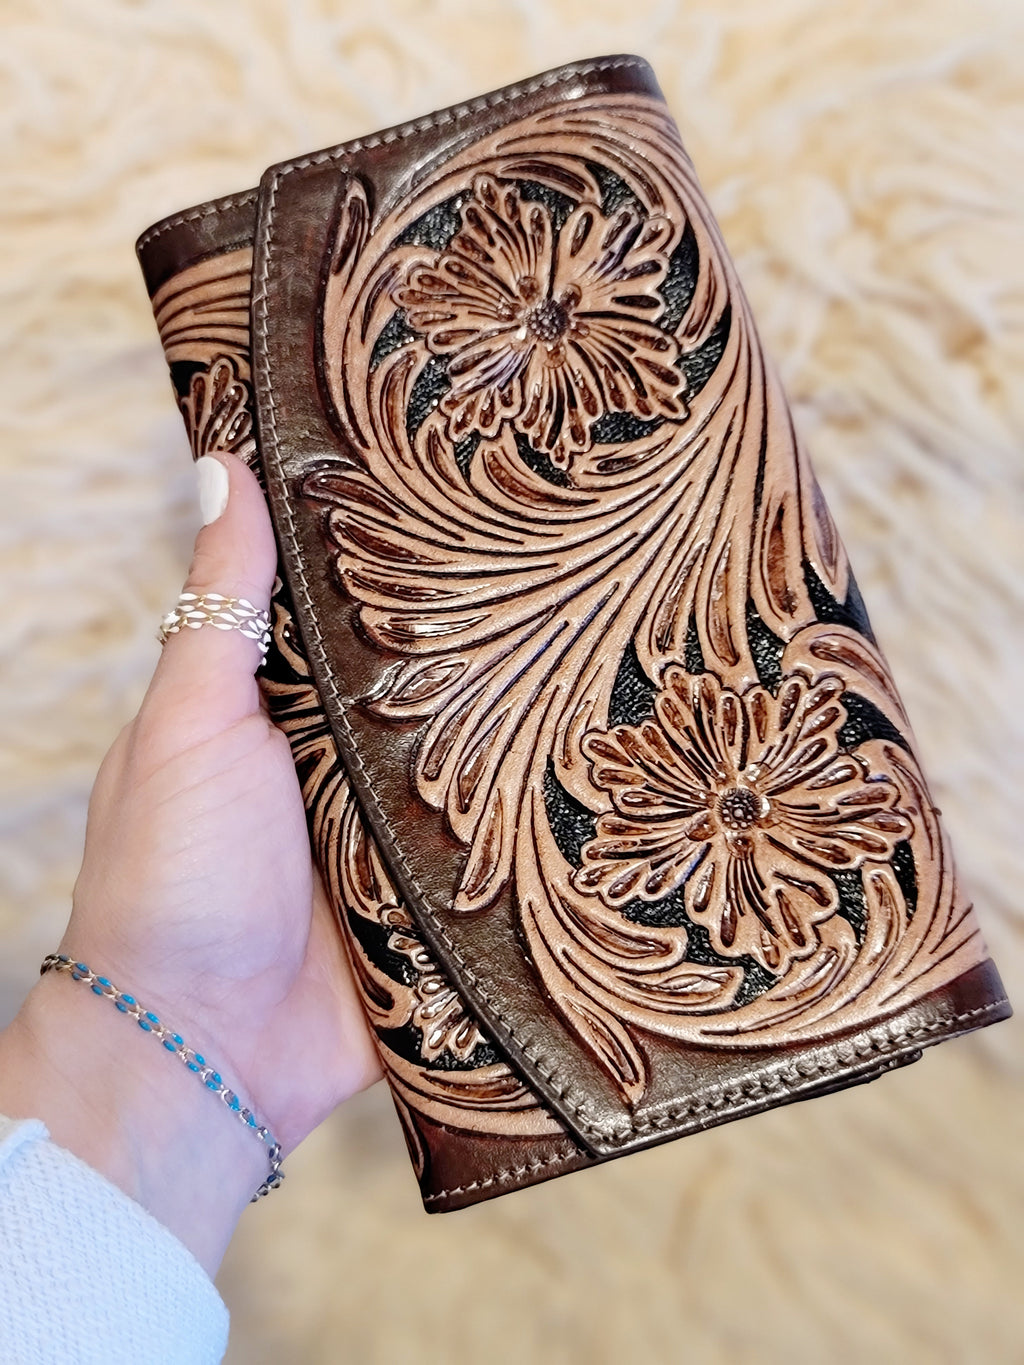 Wings of Wonder Hand Painted Leather Wallet